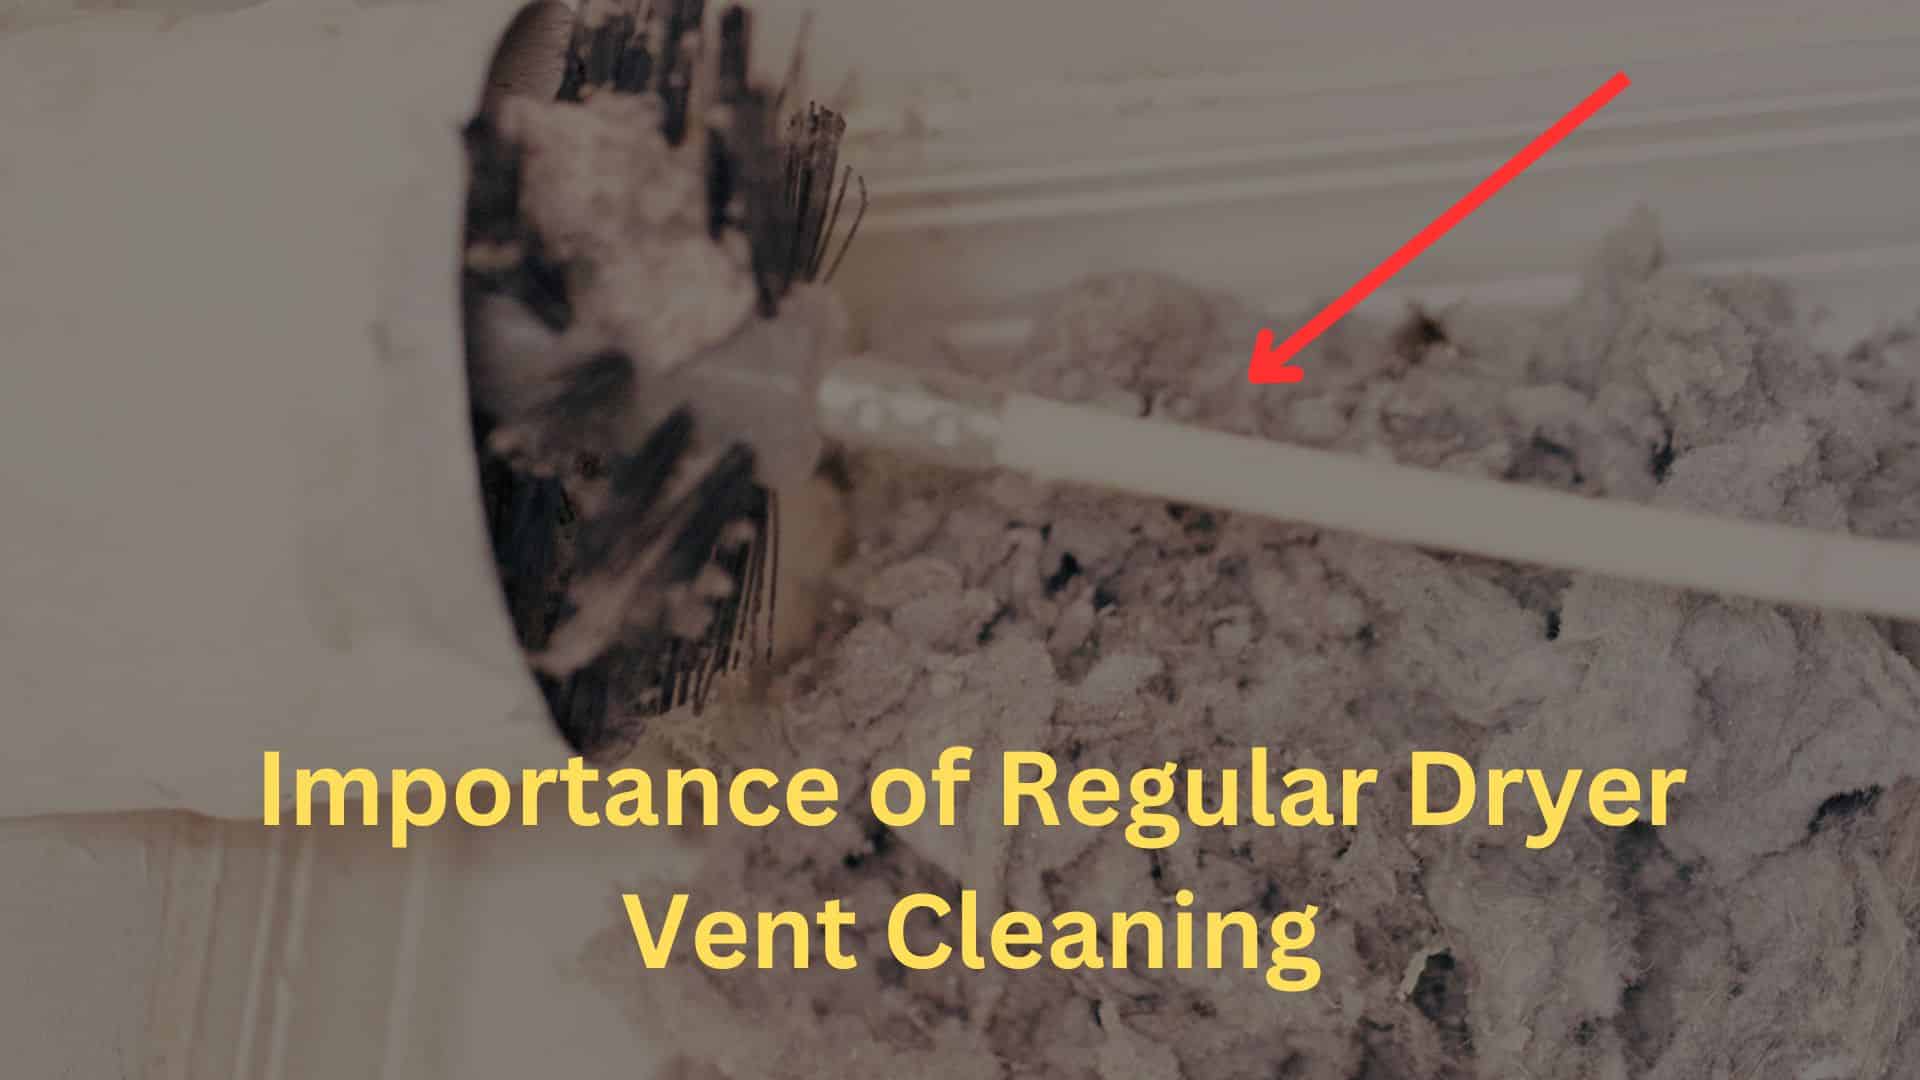 he Importance of Regular Dryer Vent Cleaning